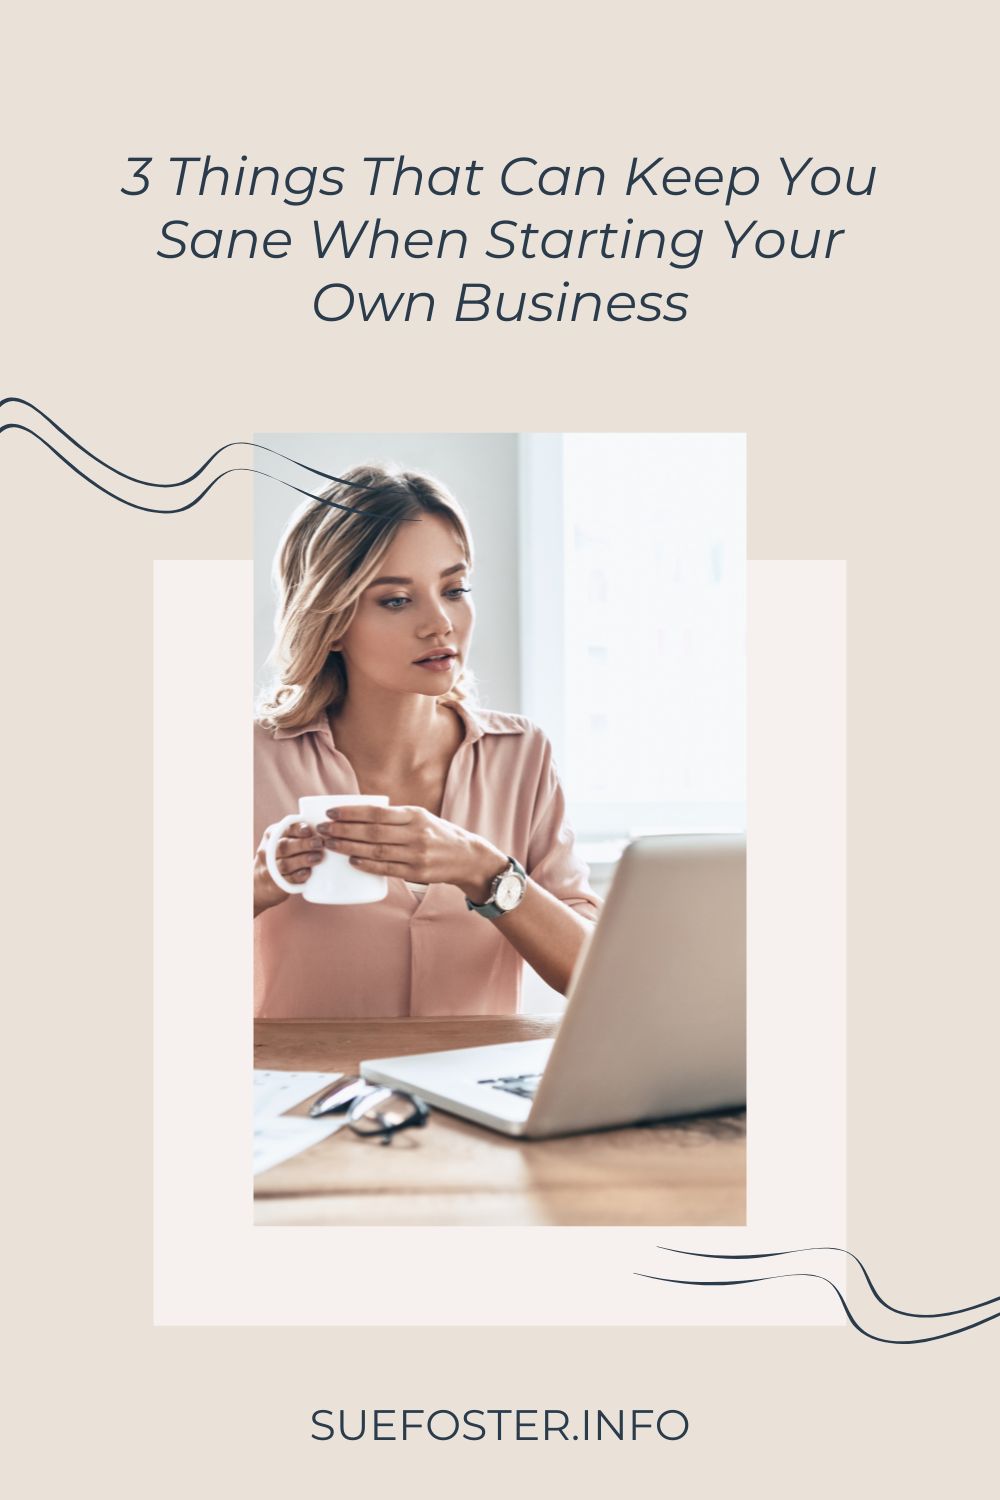 Here are just a few things that you can do to keep yourself sane when starting up your own business.